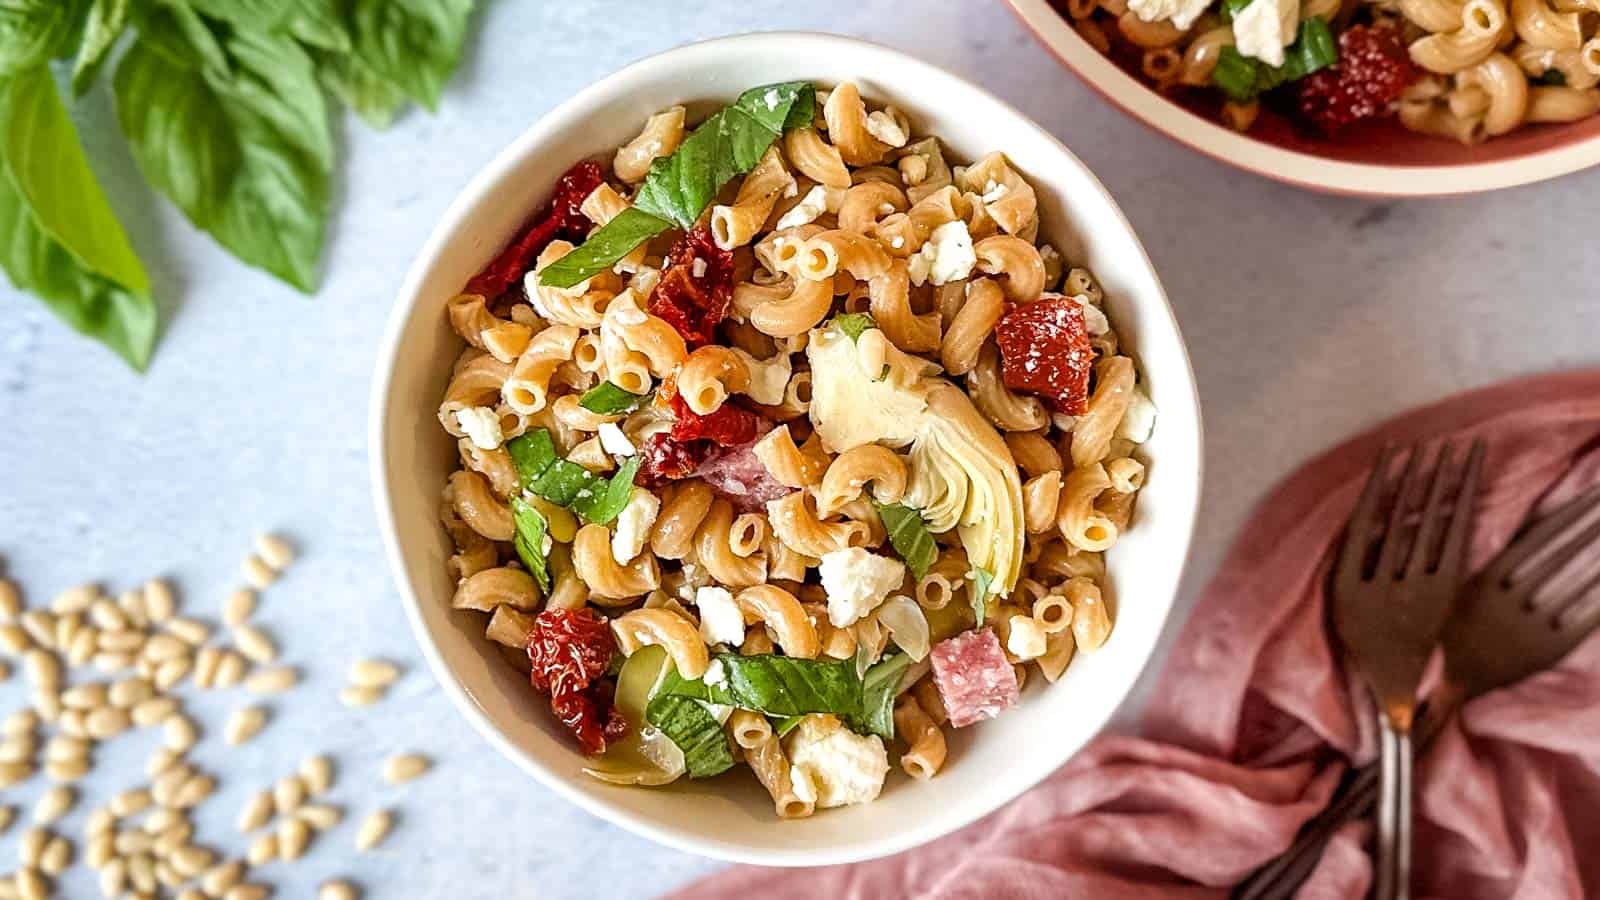 Whole wheat pasta salad in a white bowl.